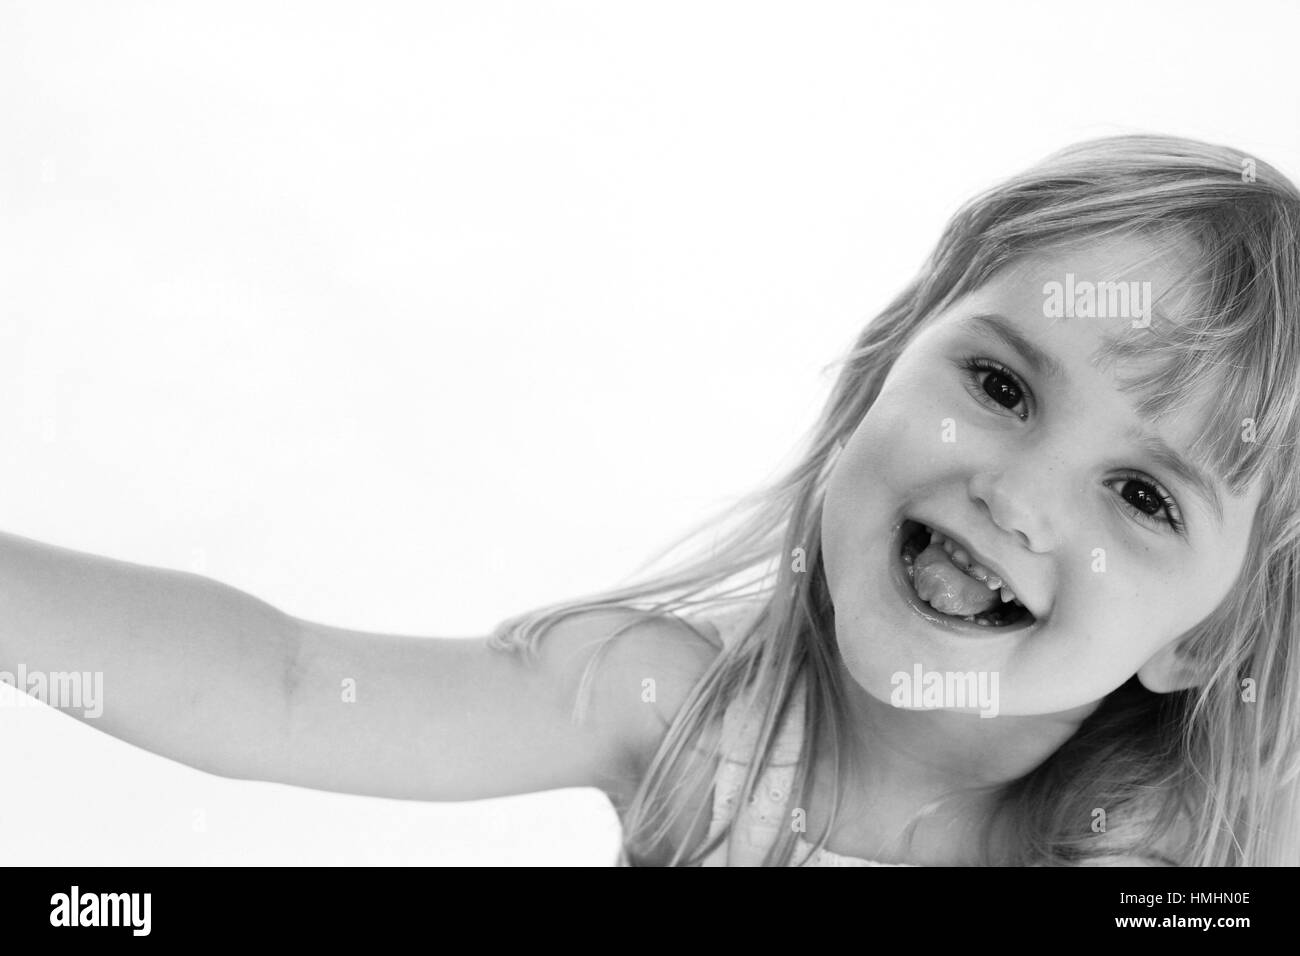 young girl smiling / child making a funny face sticking tongue out Stock Photo